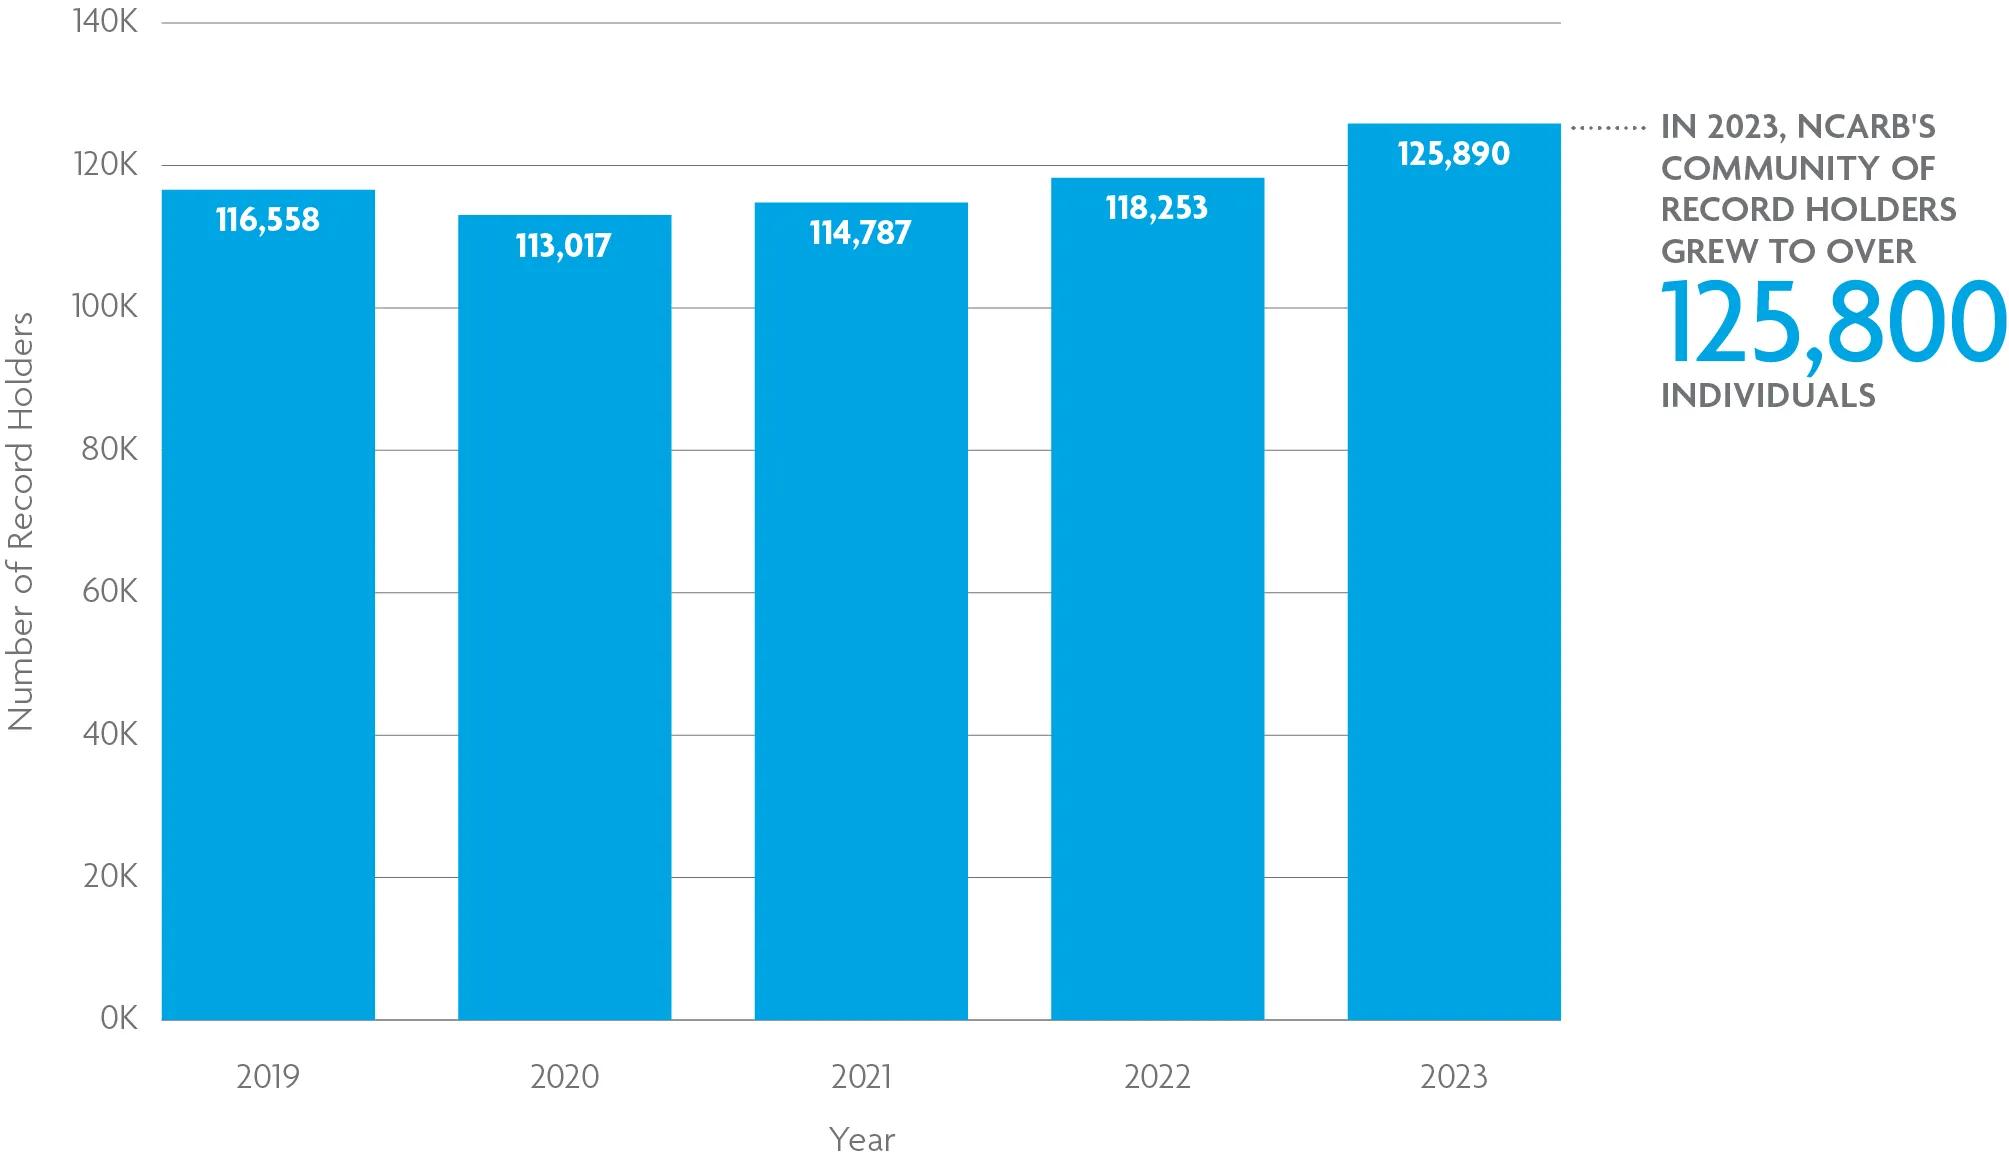 A bar chart shows that NCARB’s Record holders rose to 125,800 in 2023, compared to 116,558 in 2019. For help with data accessibility, contact communications@ncarb.org.